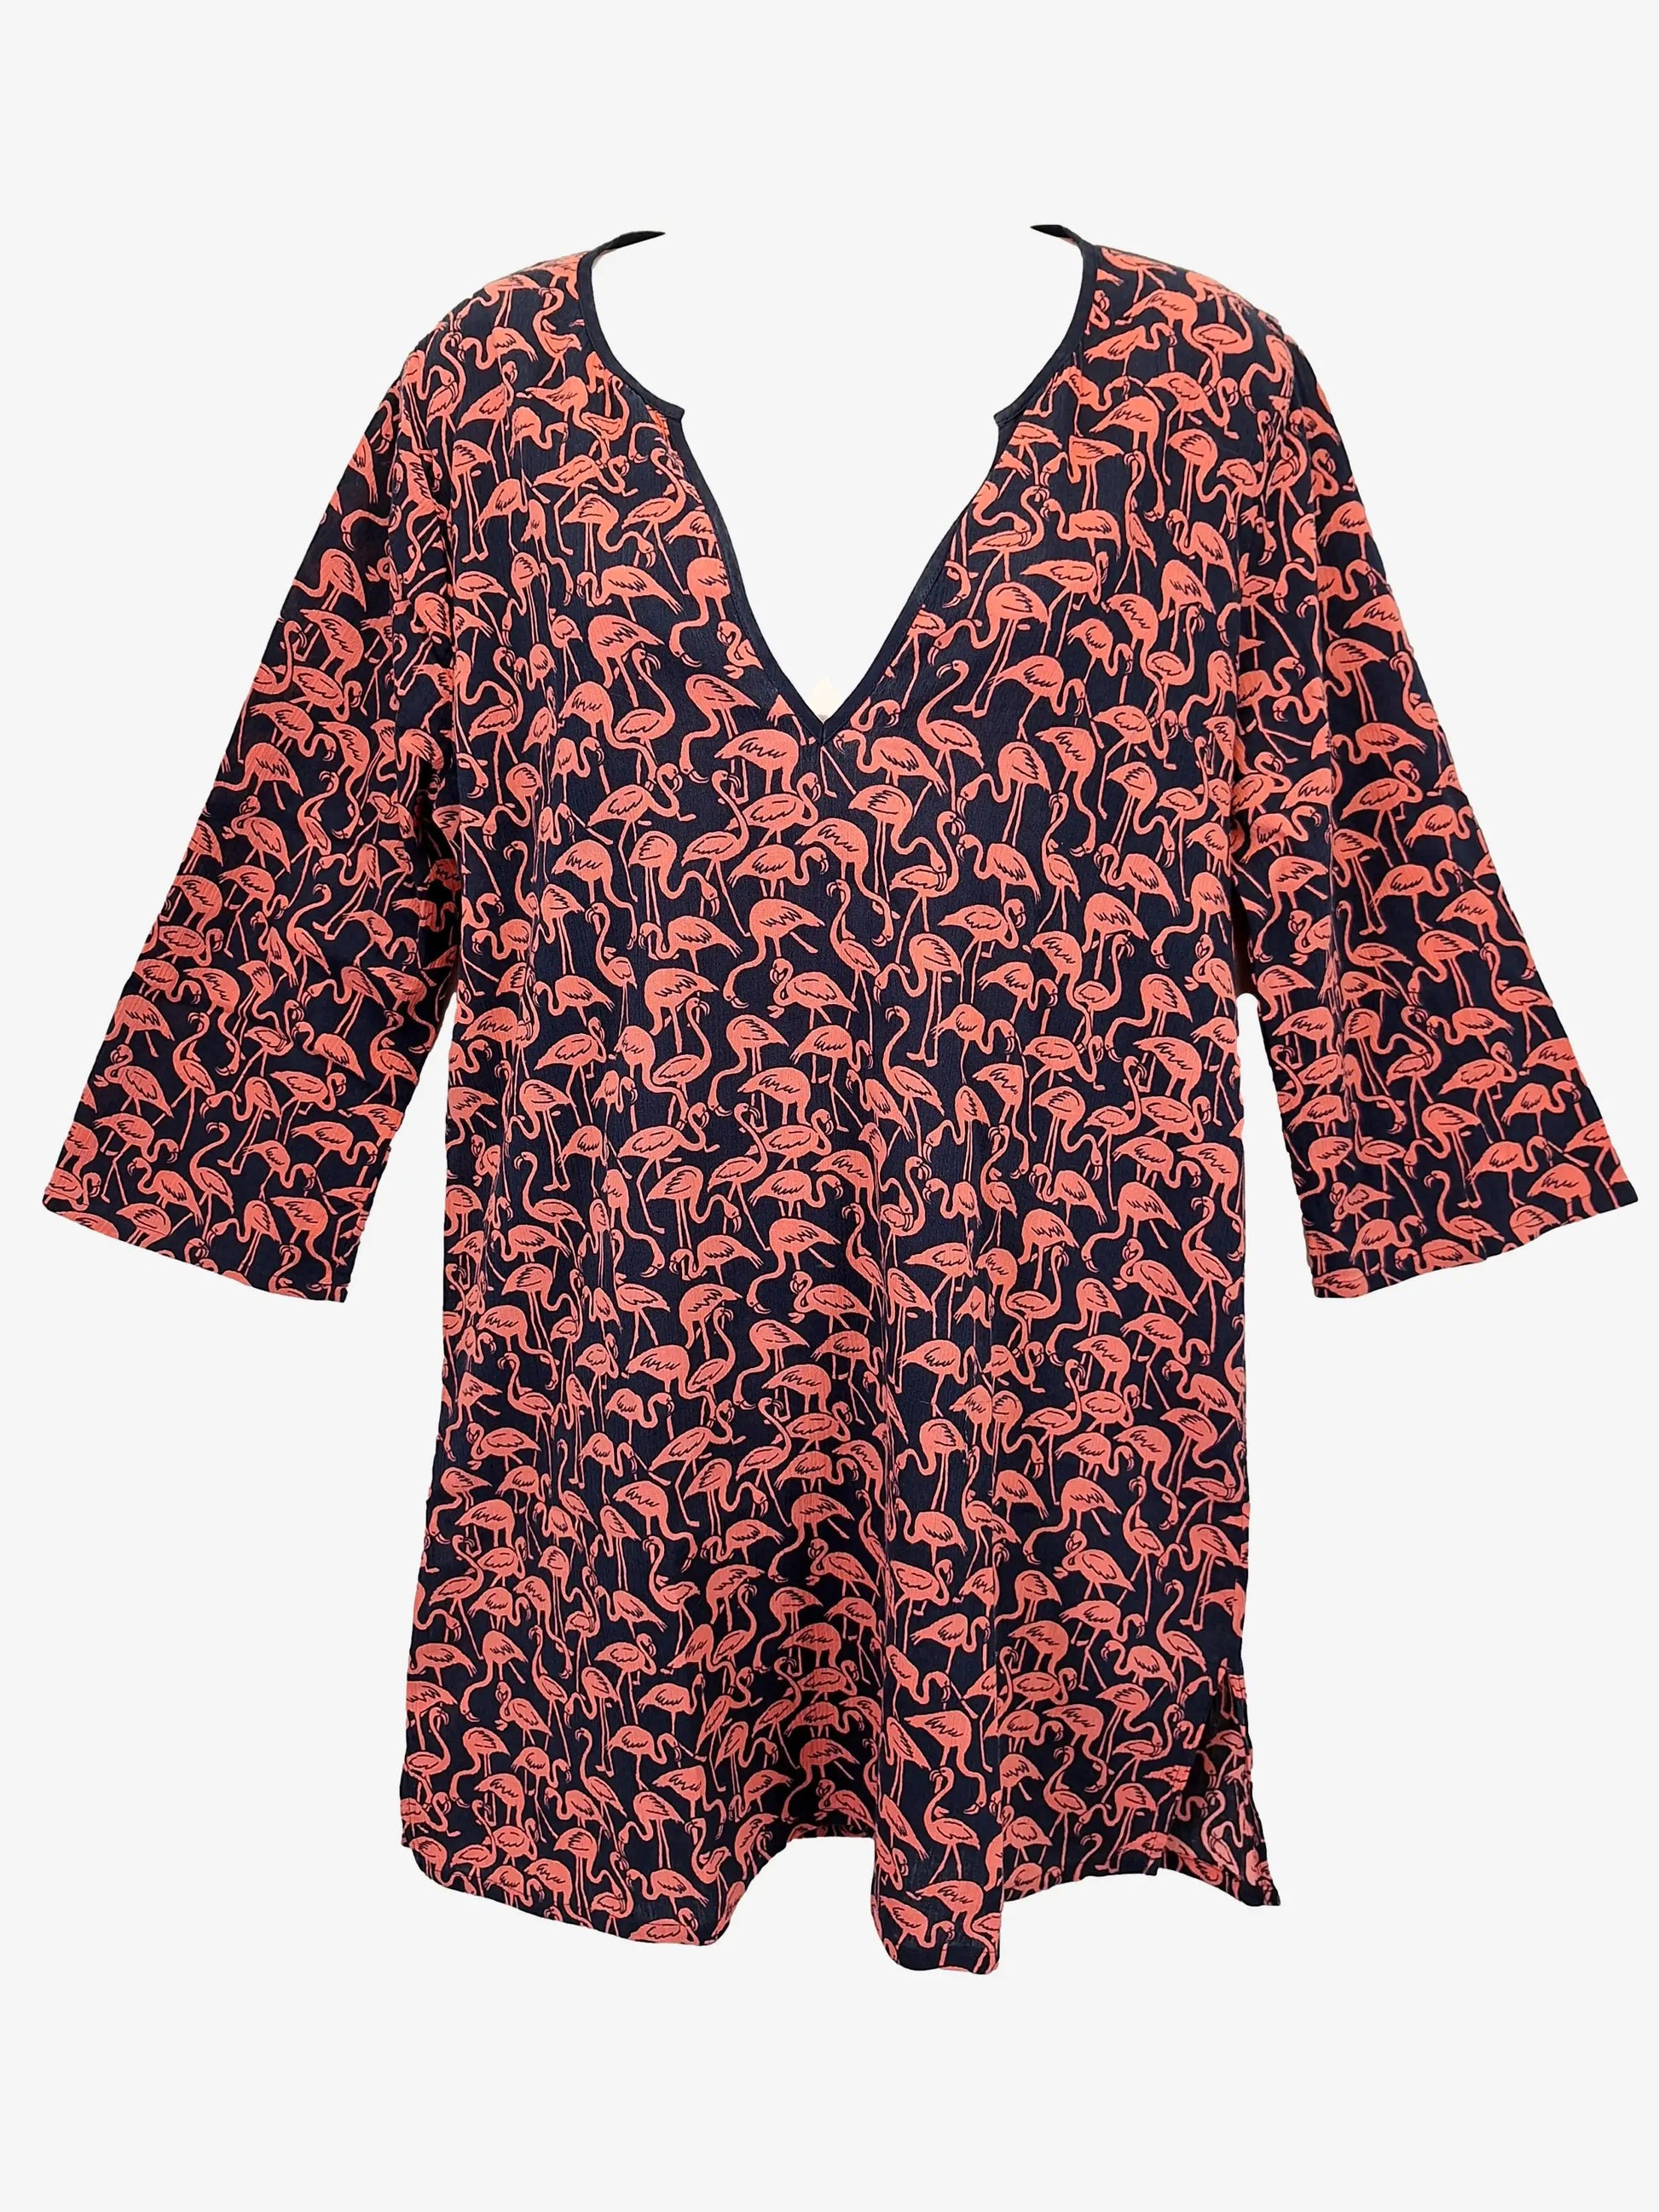 J Crew Flamingo Resort Cover Up Dress Size M by SwapUp-Online Second Hand Store-Online Thrift Store